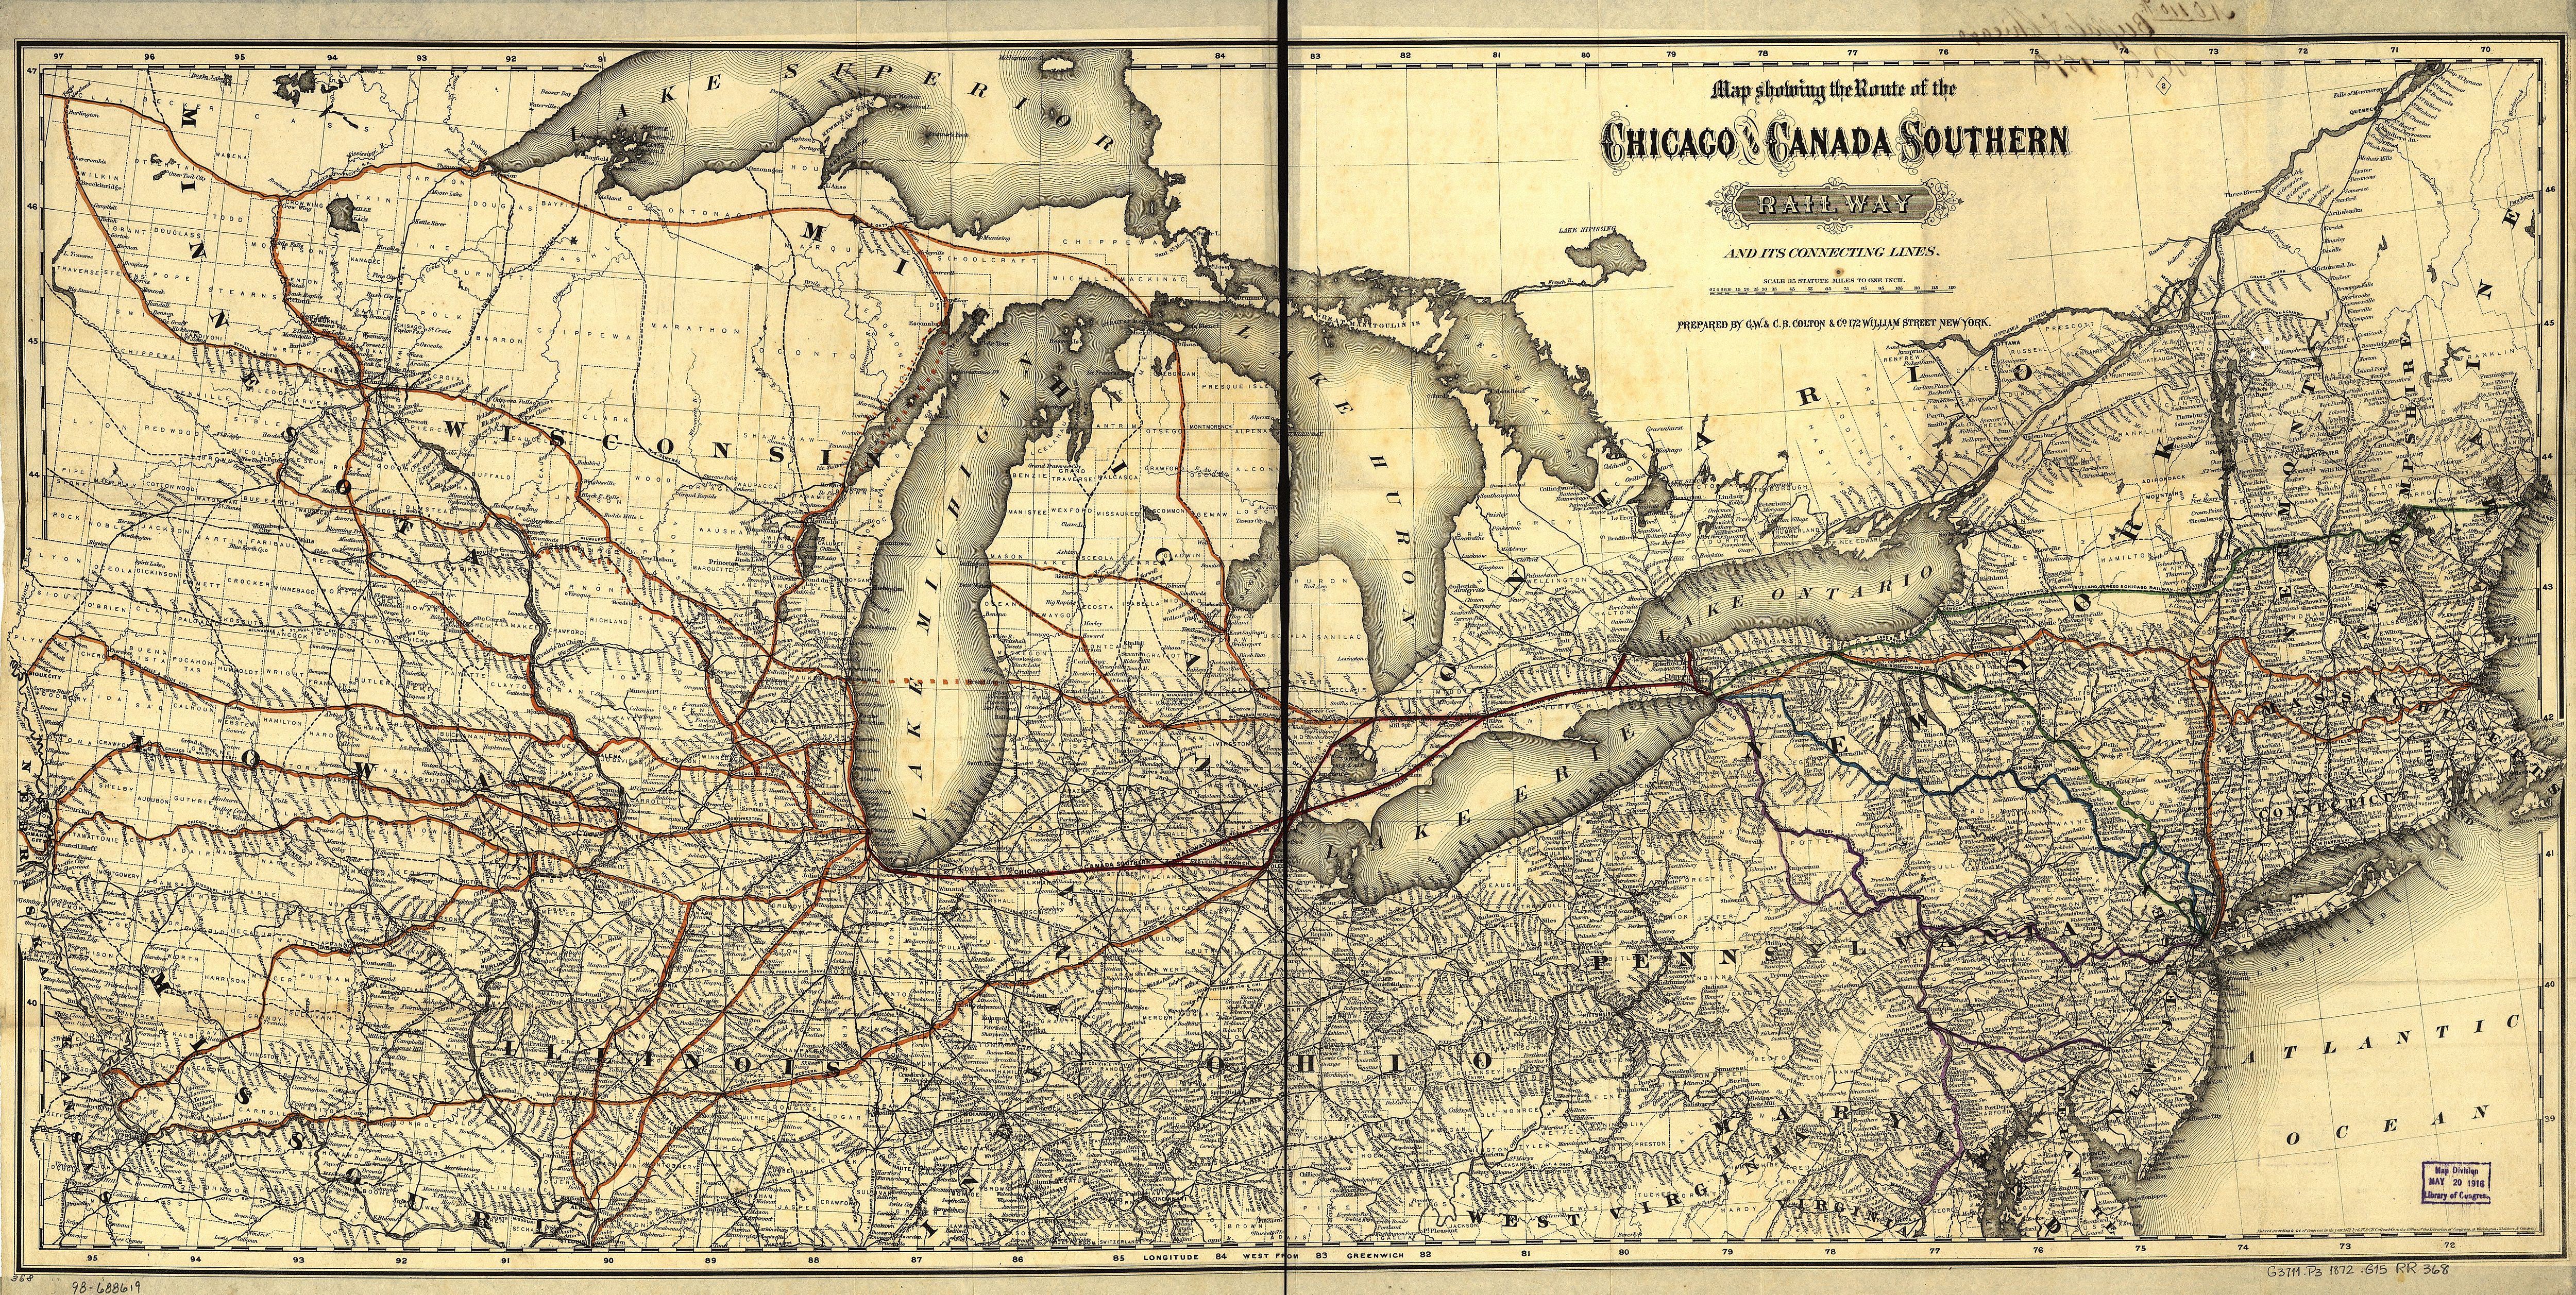 Most of present day Charlevoix County was originally part of Emmet County.